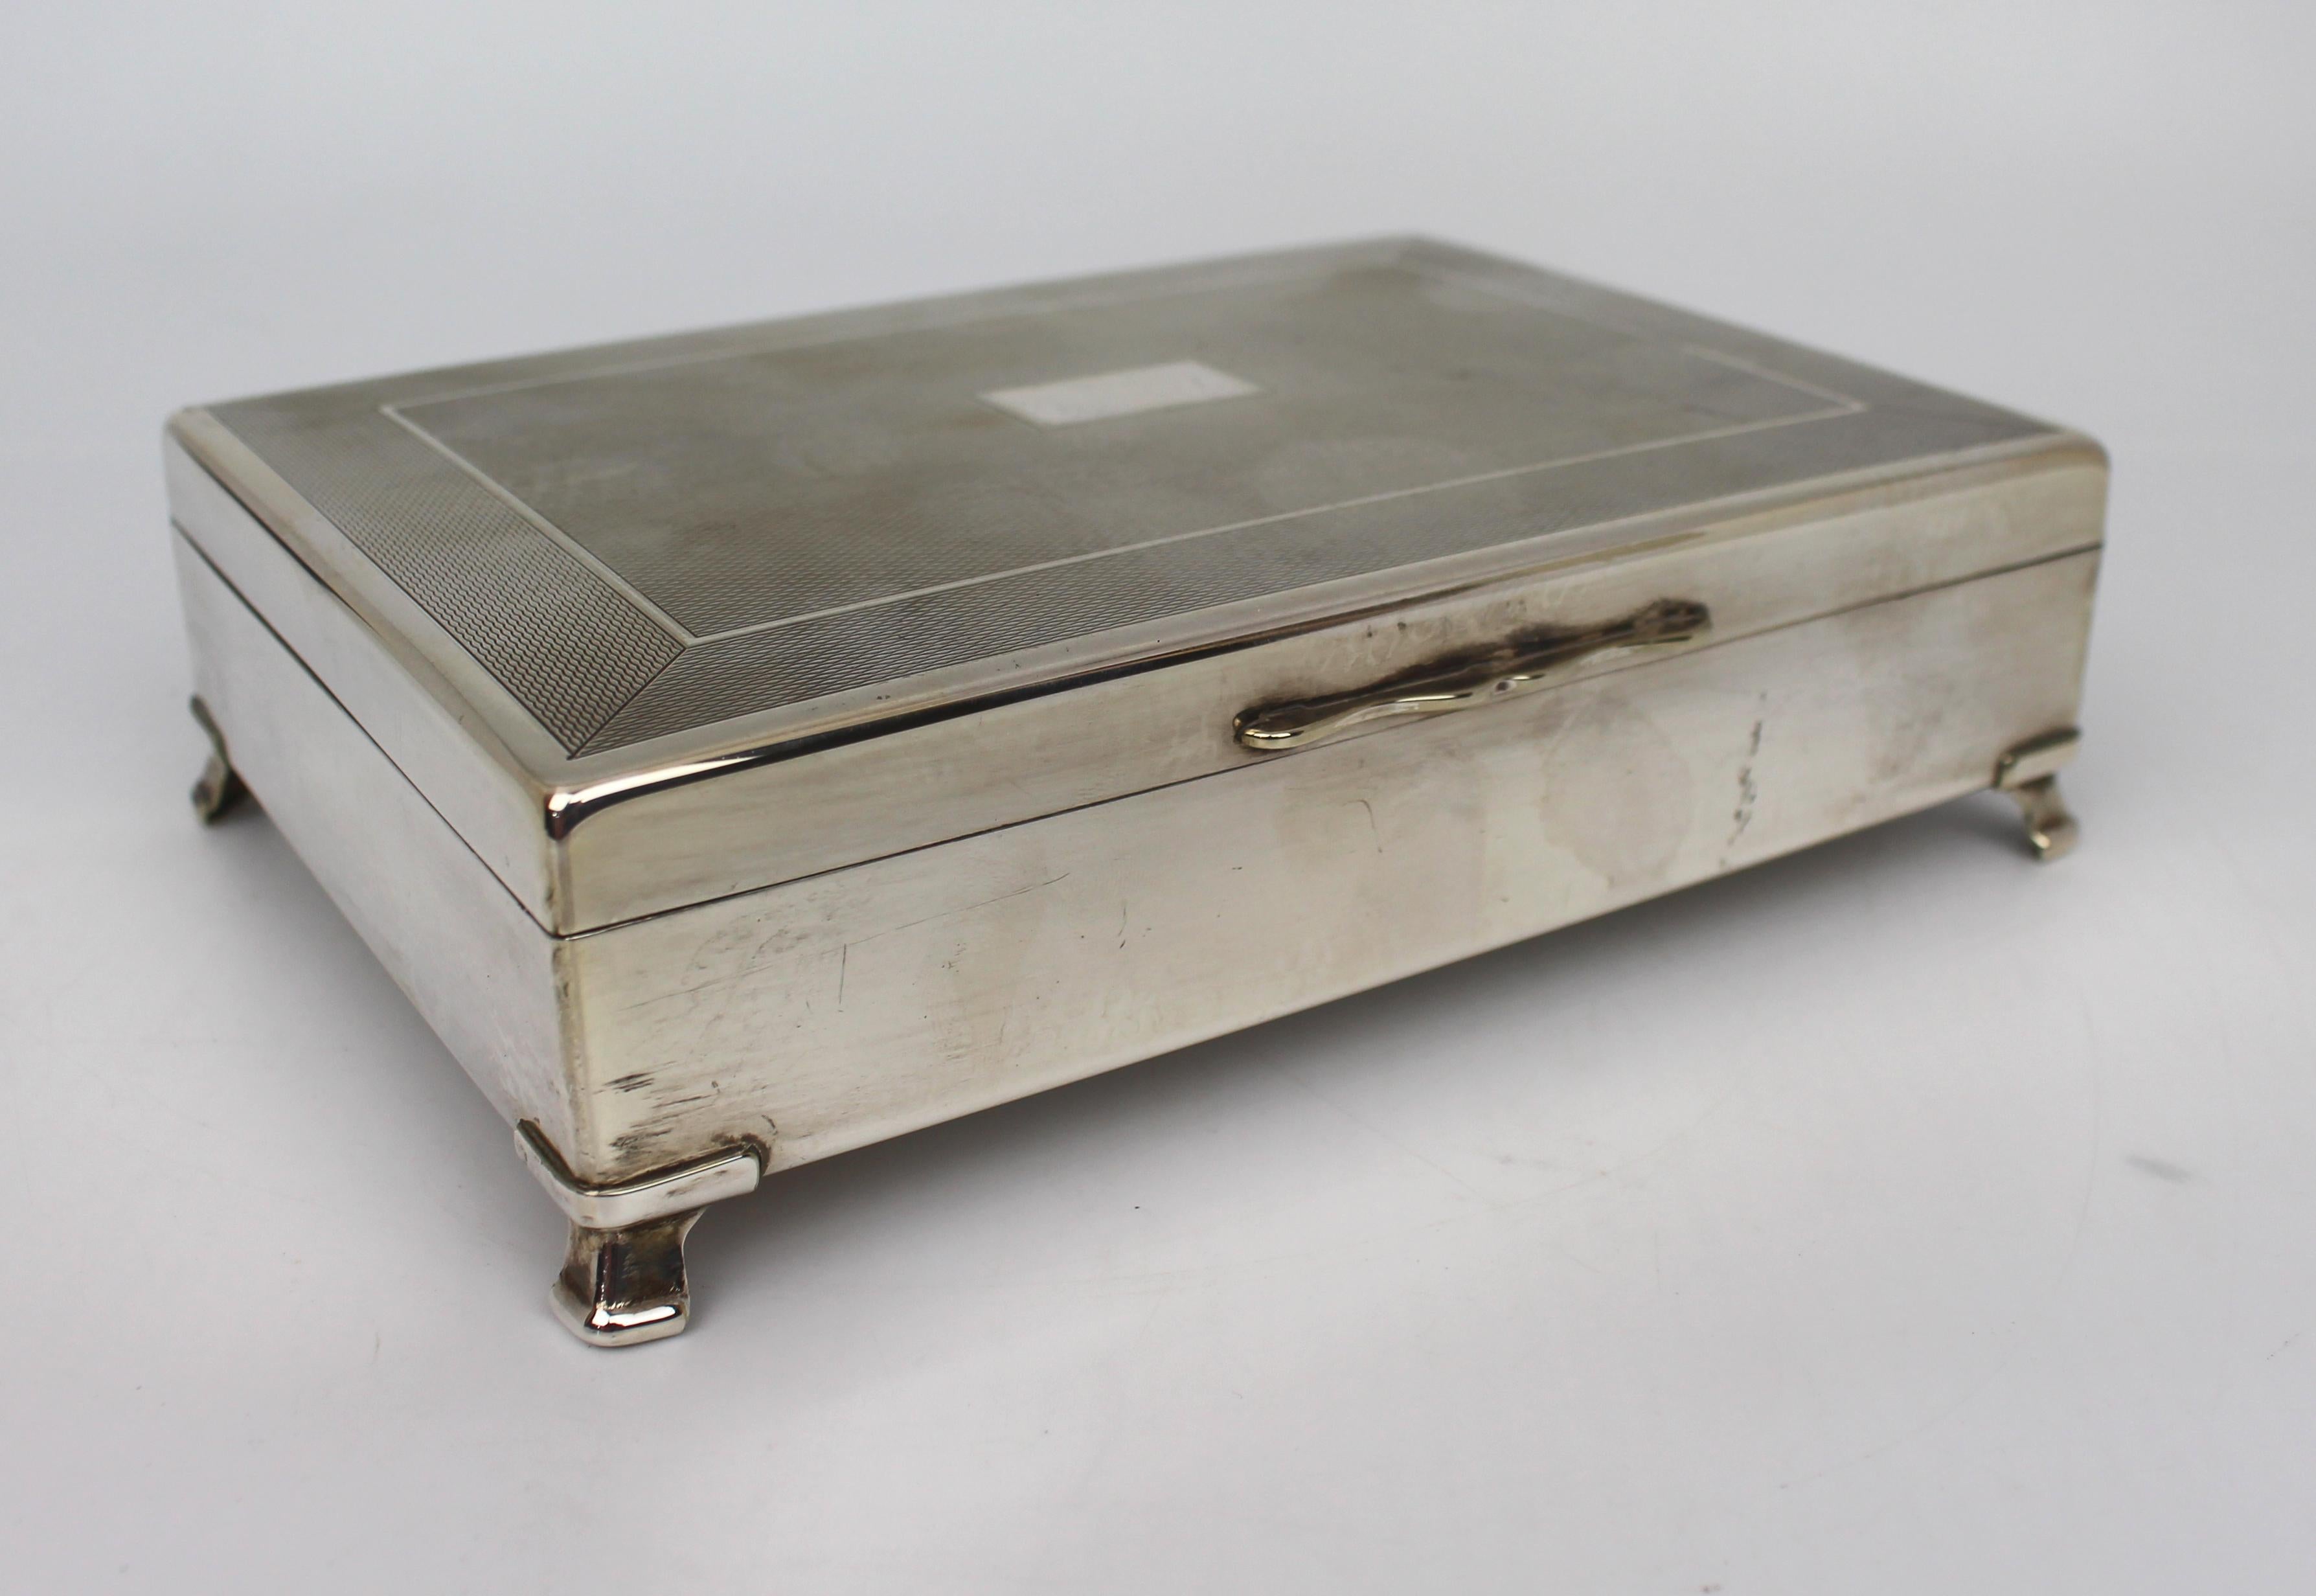 English Aristocrat silver plated footed cigarette box


Mid 20th century, English. Made by Harman Brothers, Birmingham

EPNS, silver plated

Fine cross-hatched, engine-turned engraved hinged lid with blank central cartouche

Cedar wood